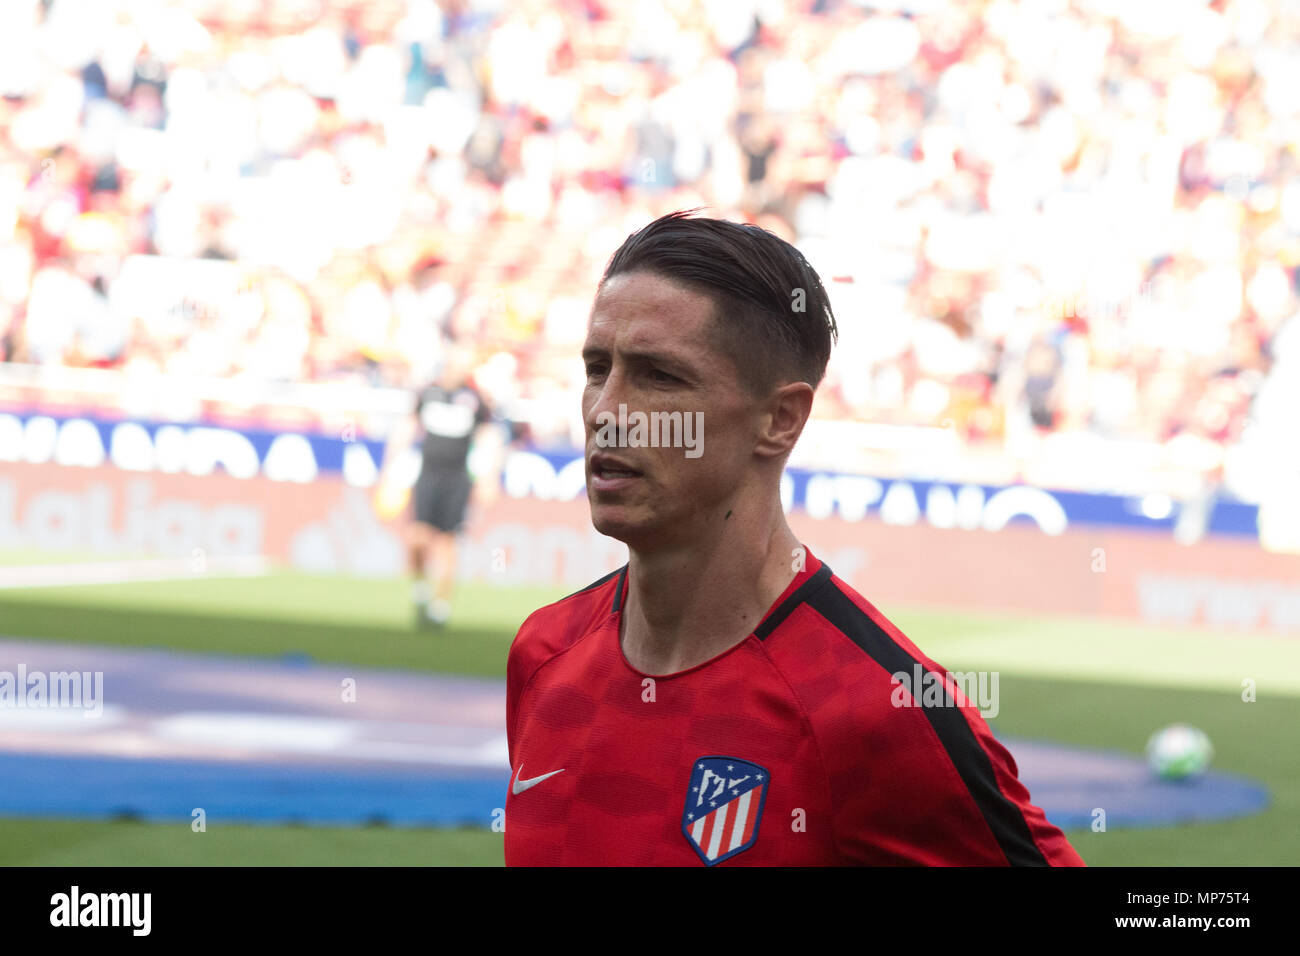 Madrid, Spain. 20th May 2018. Wanda Metropolitano stadium. Madrid. Spain. More than 68.000 people comes to see the 38th seasson of La Liga and the retire of Fernando Torres Idol of the club. The match confront Atletico de Madrid v Eibar S.D. In the image Fernando Torres. Credit: Jorge Gonzalez /Alamy Live News/Alamy Live News Stock Photo